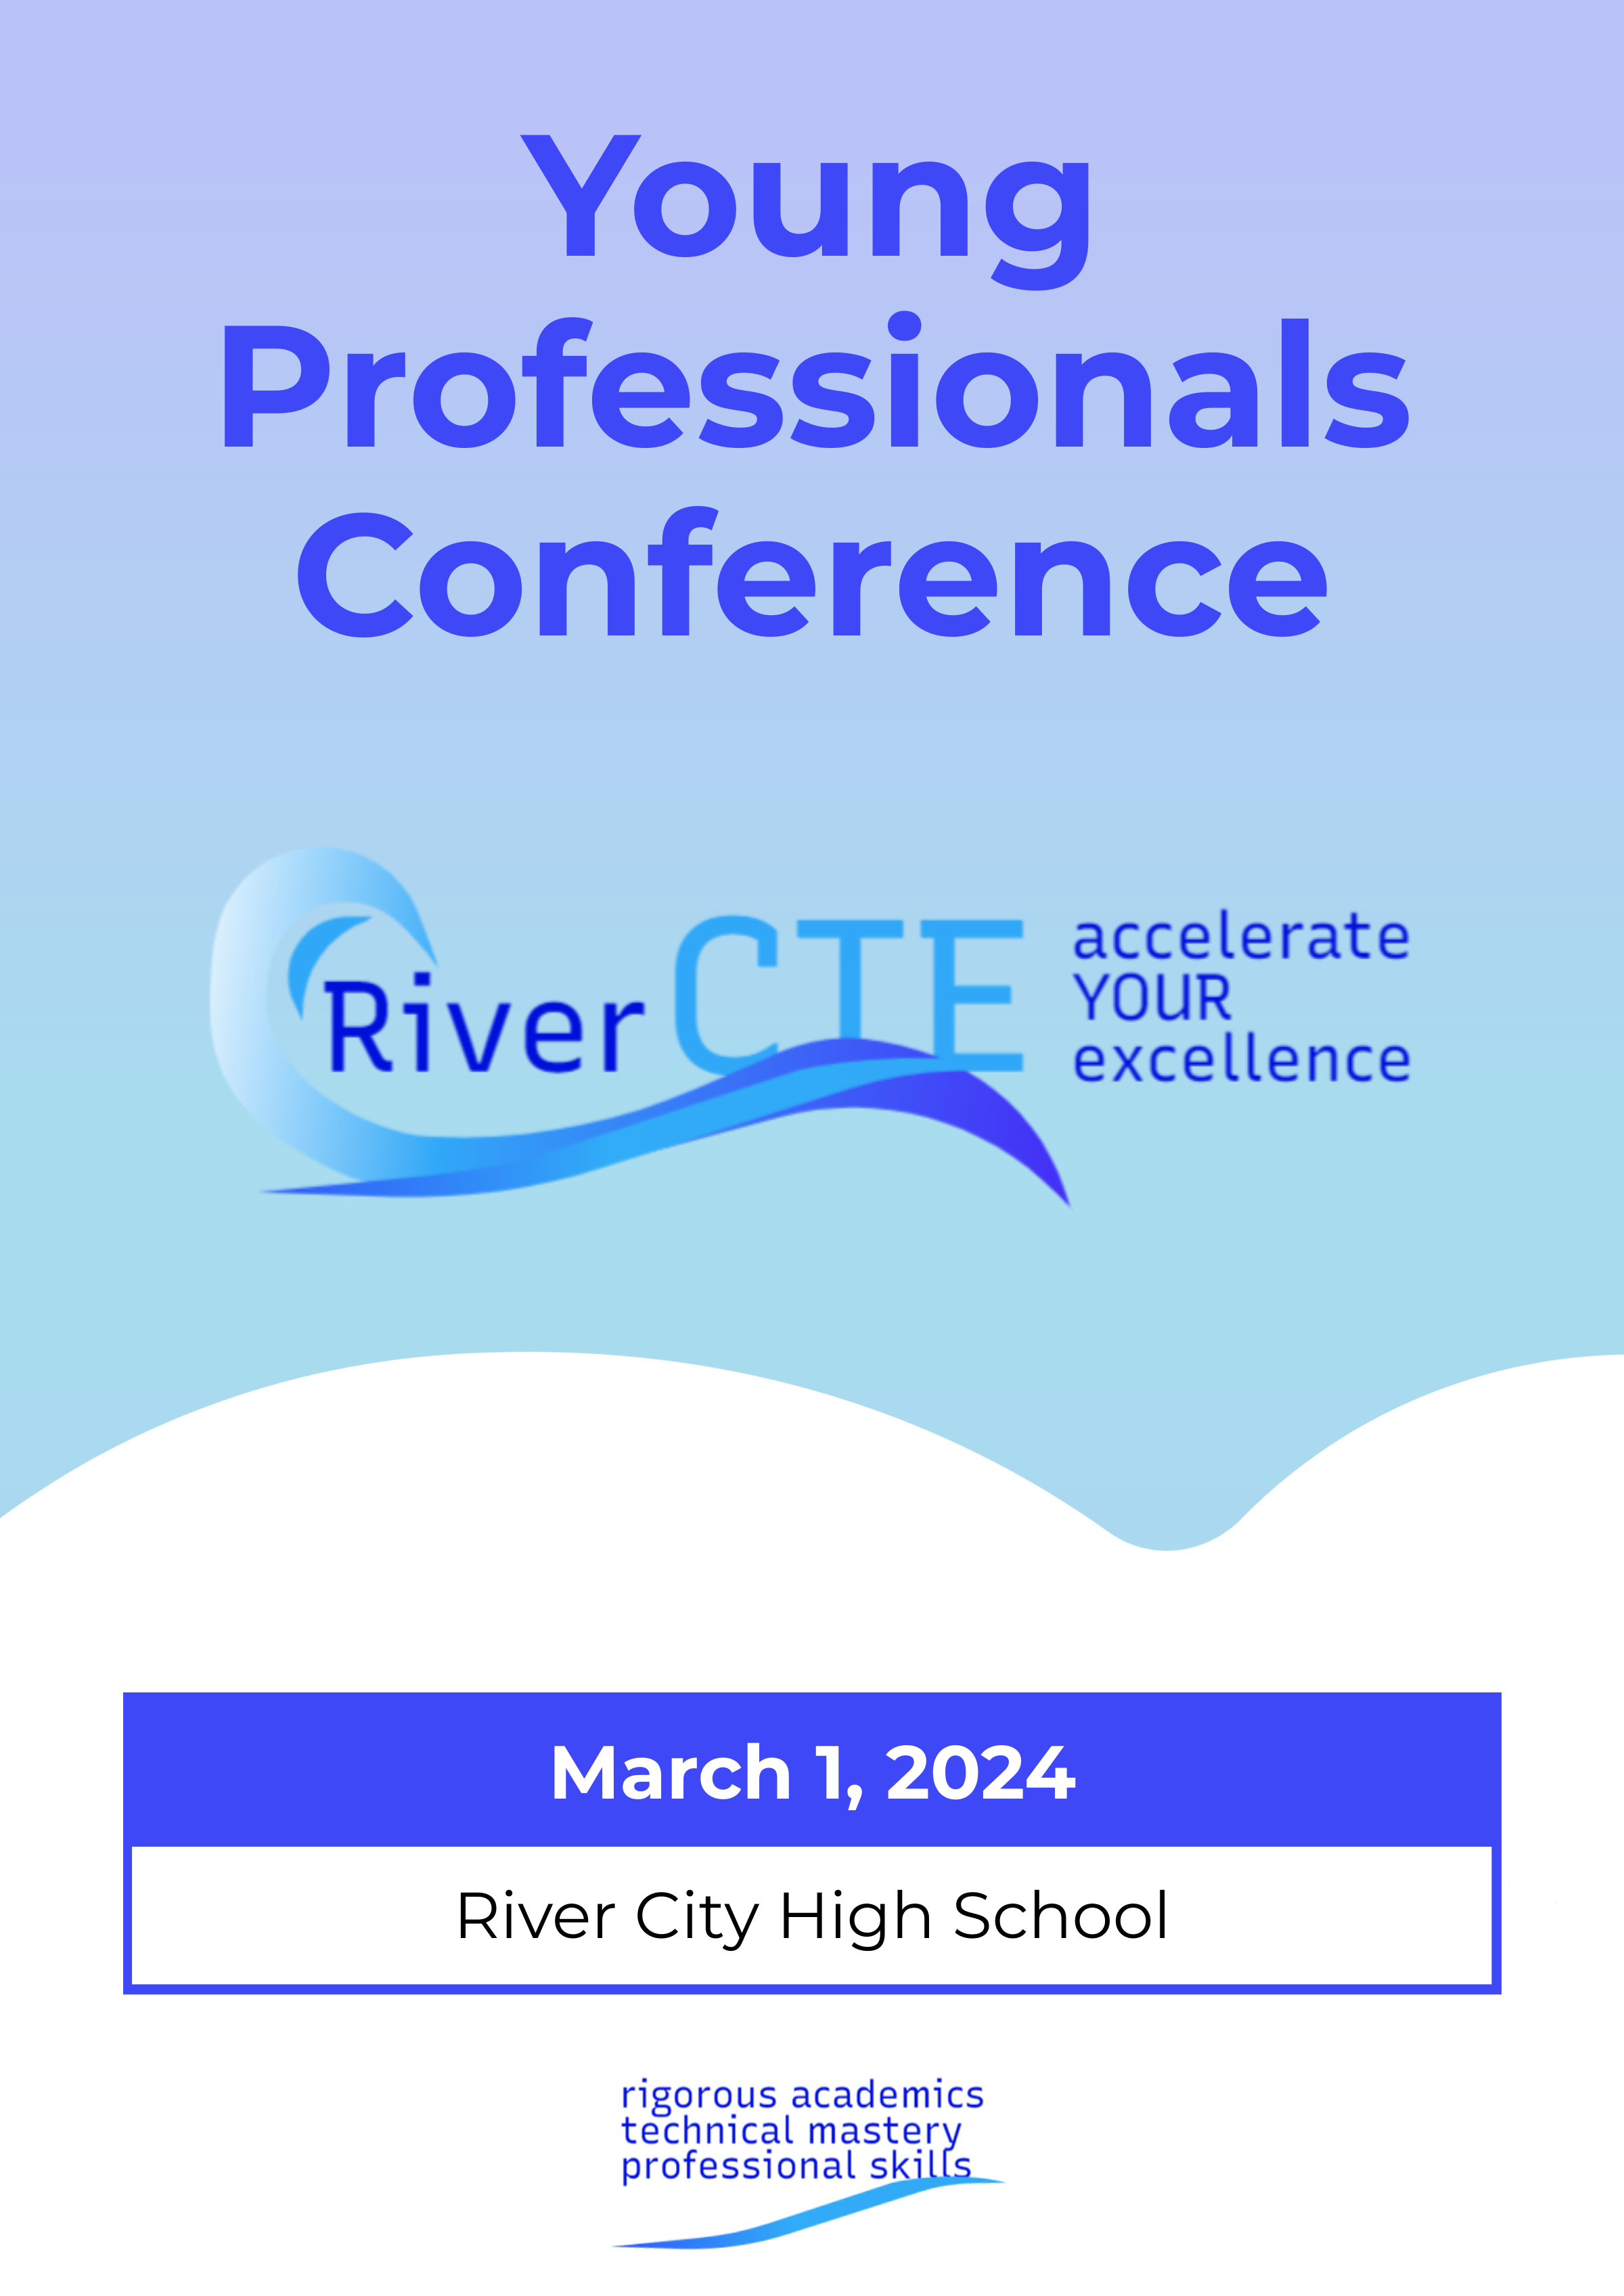 Young Professionals Conference March 1, 2023